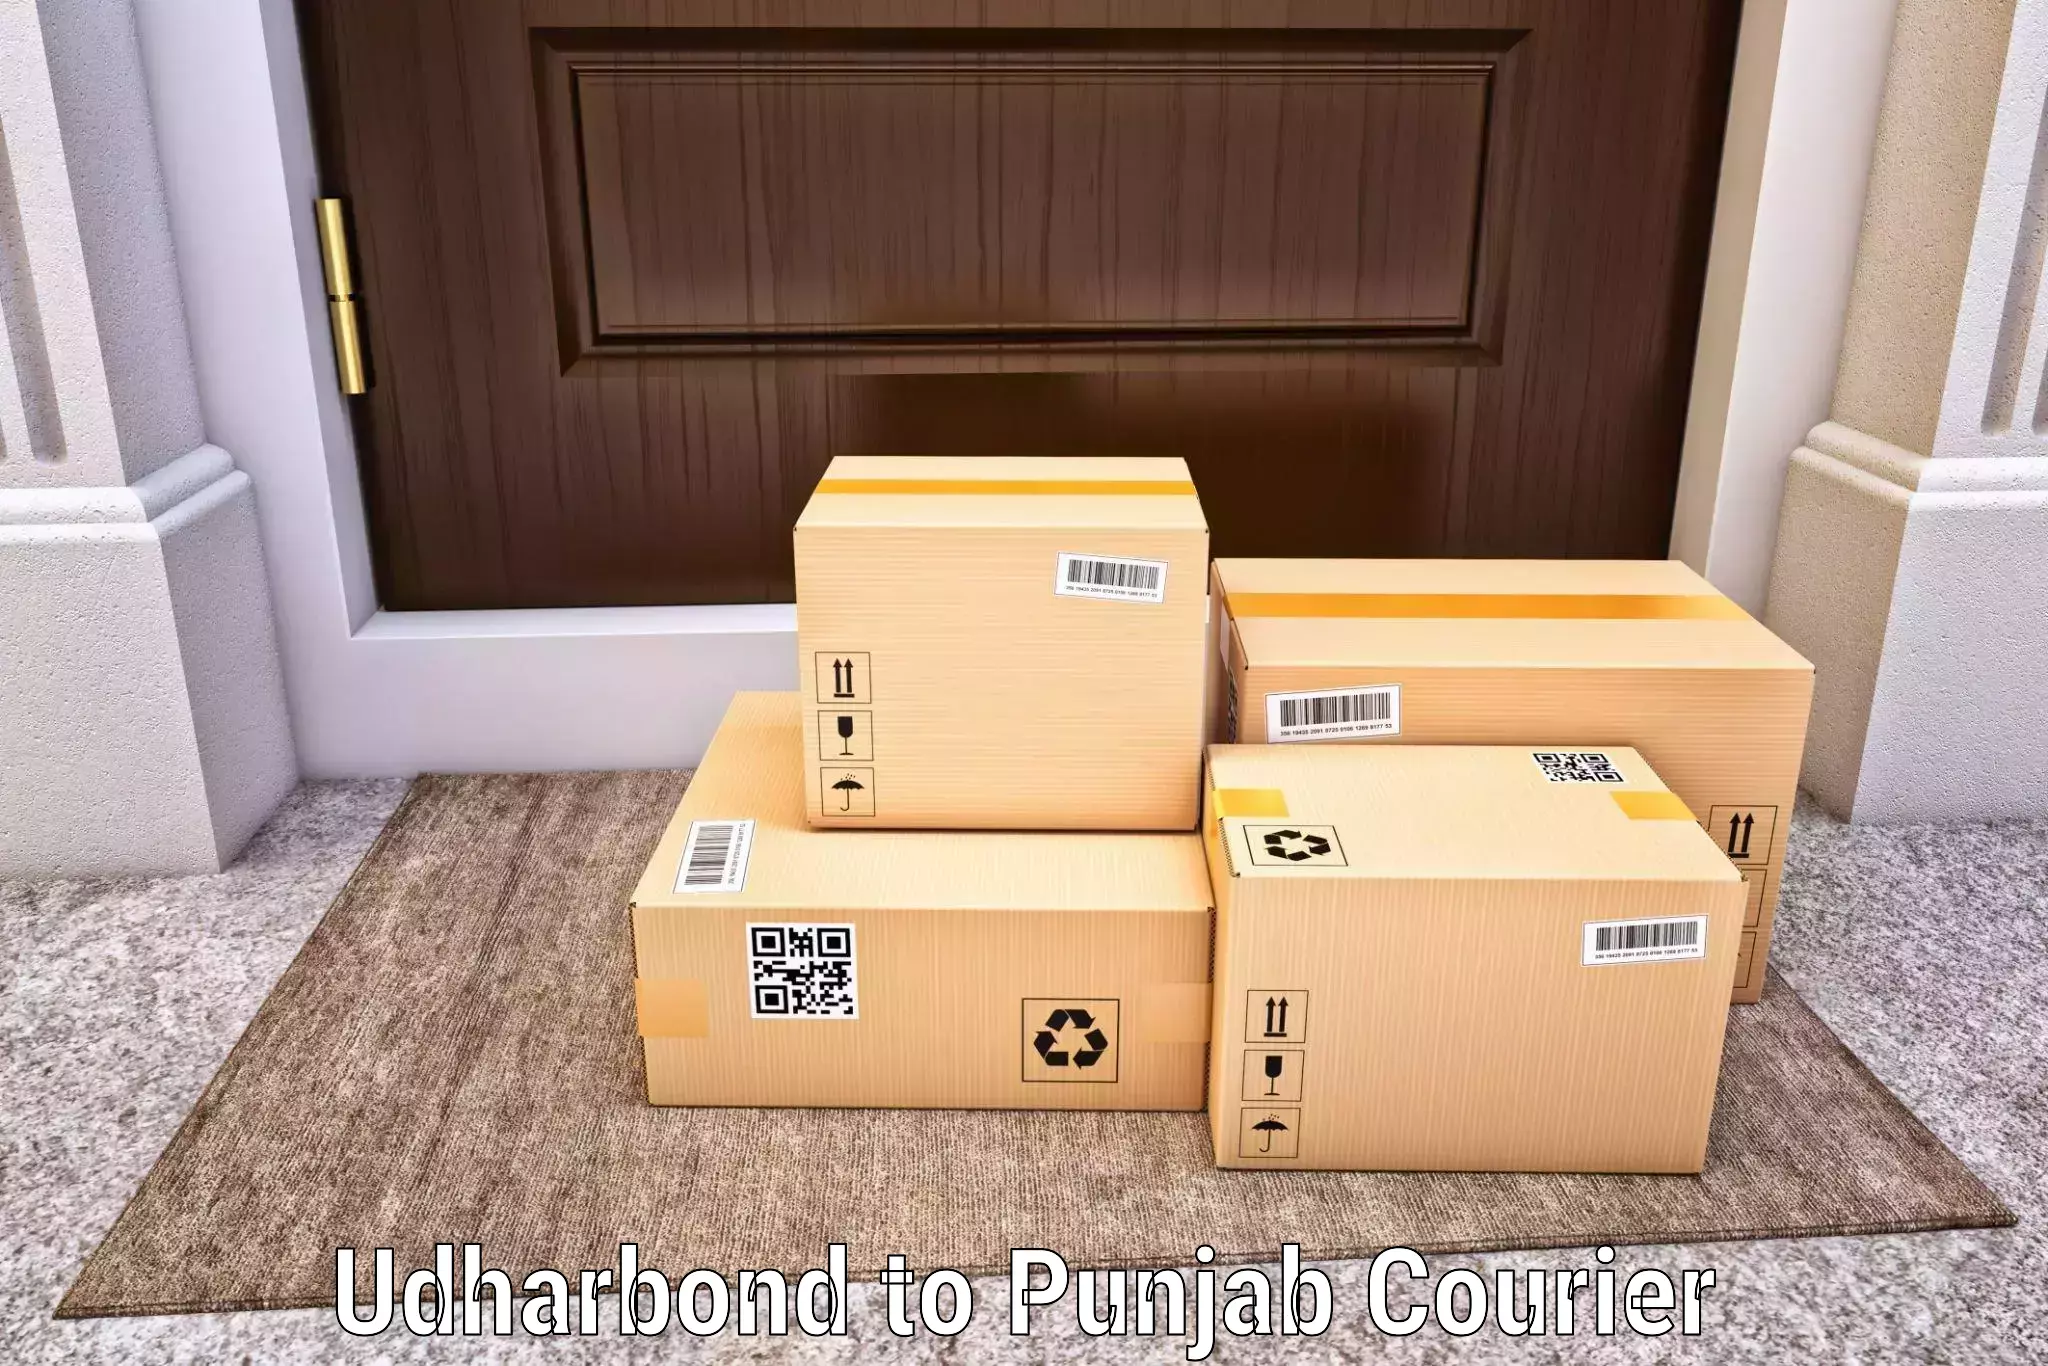 Full-service courier options Udharbond to Dera Bassi